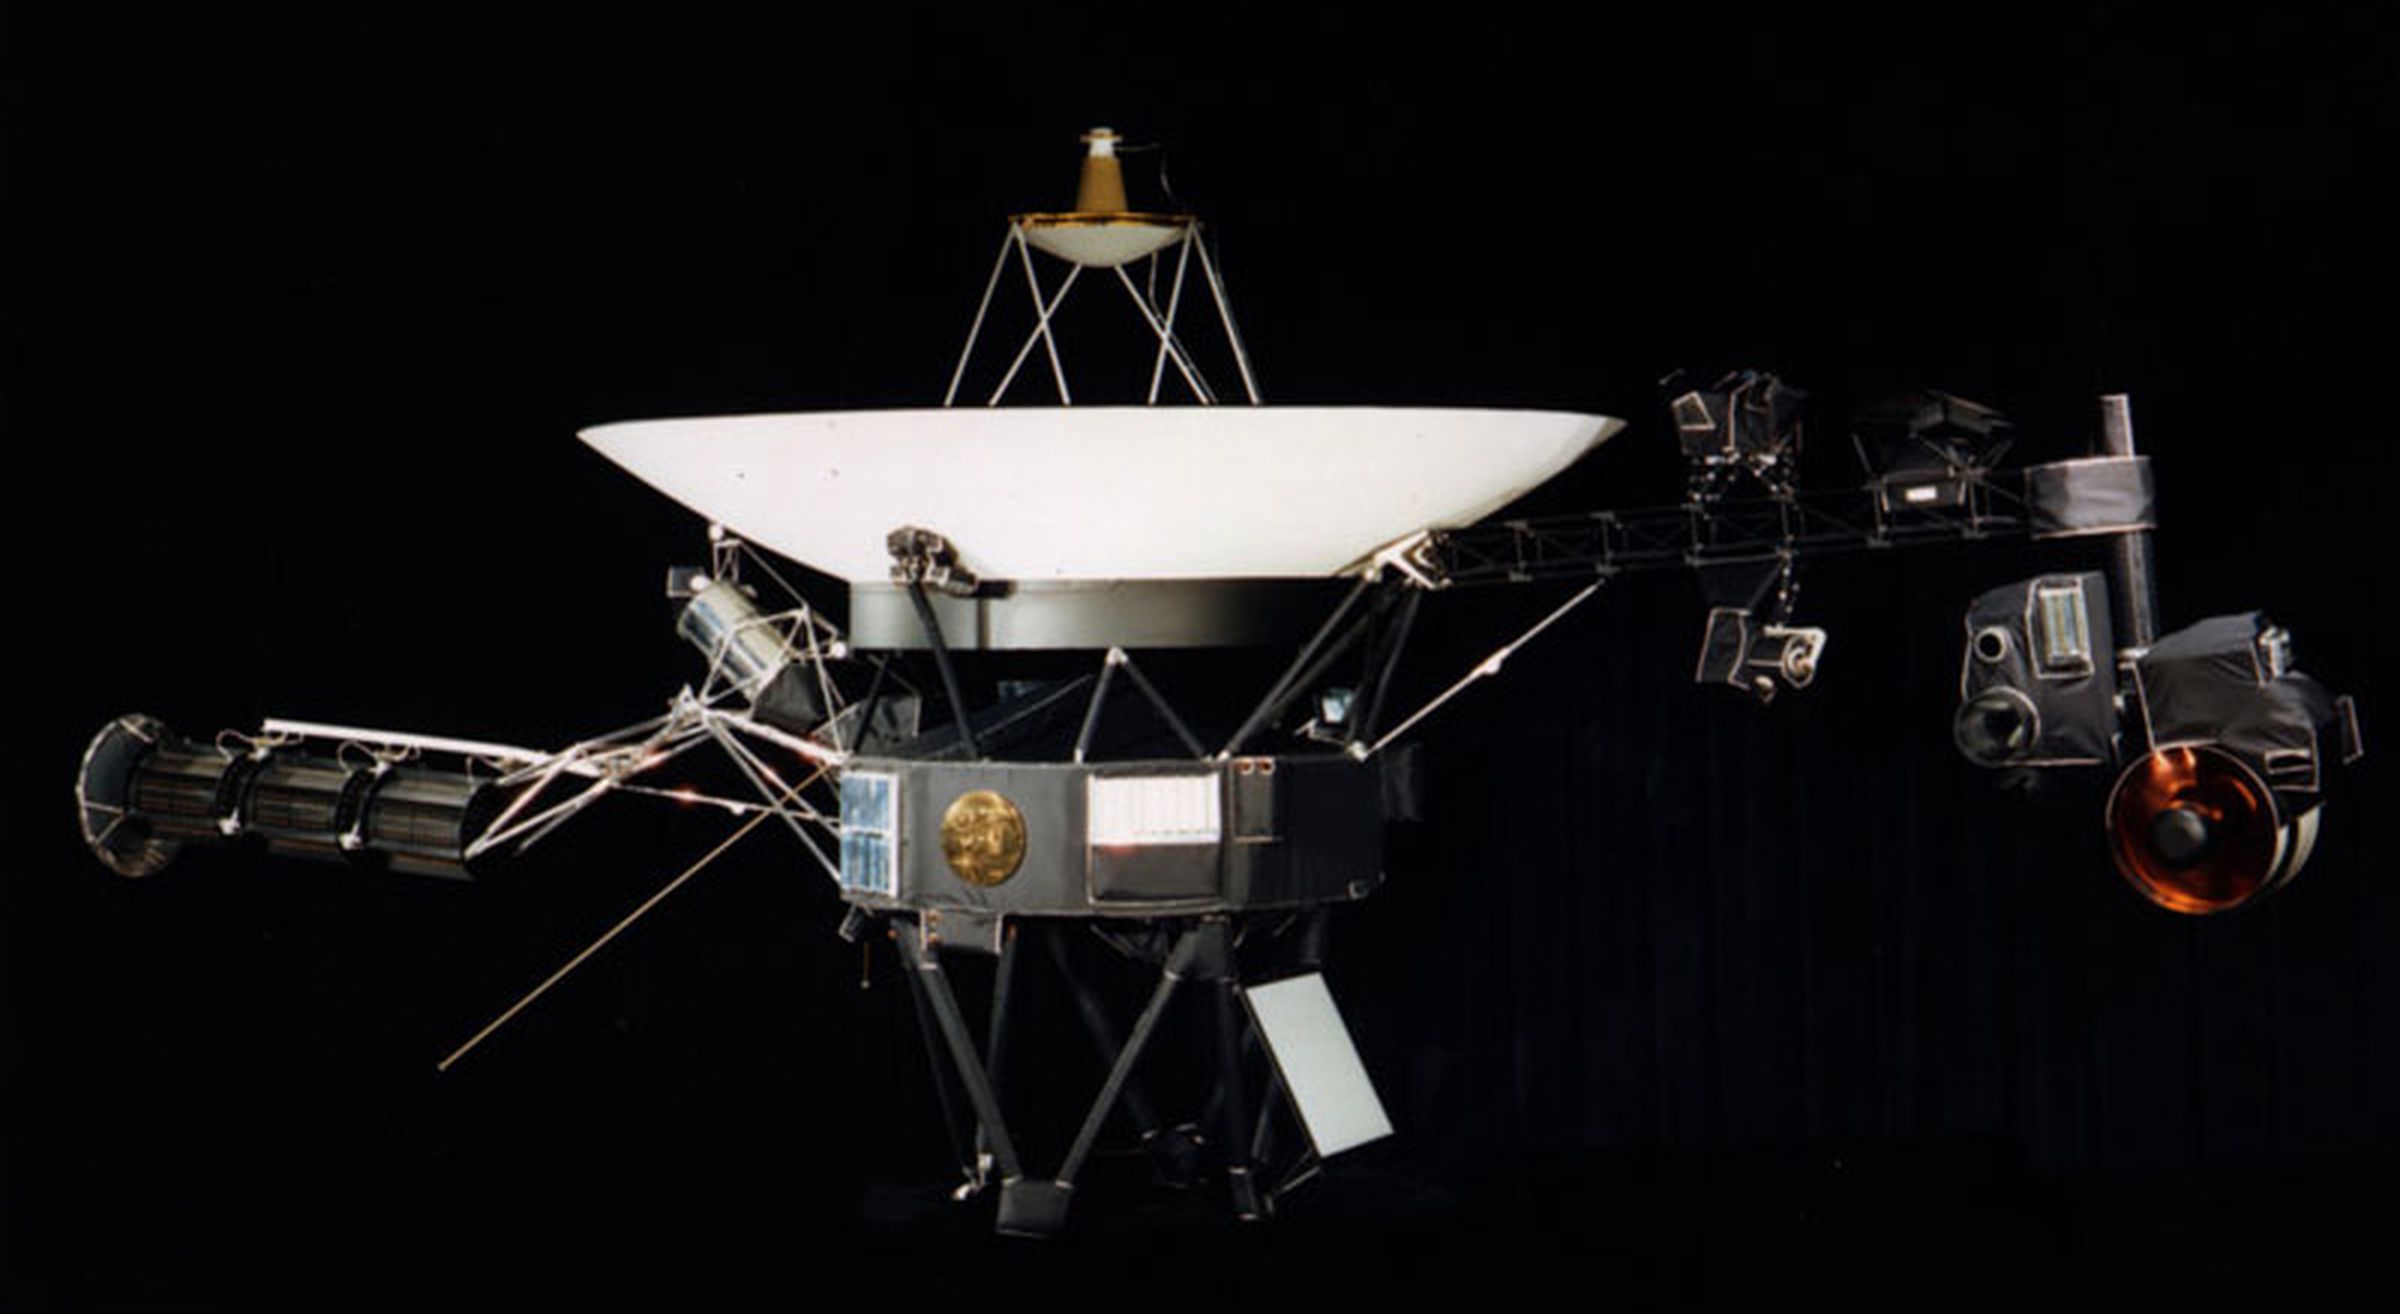 One of the two Voyager probes, with the Golden Record mounted on its side.